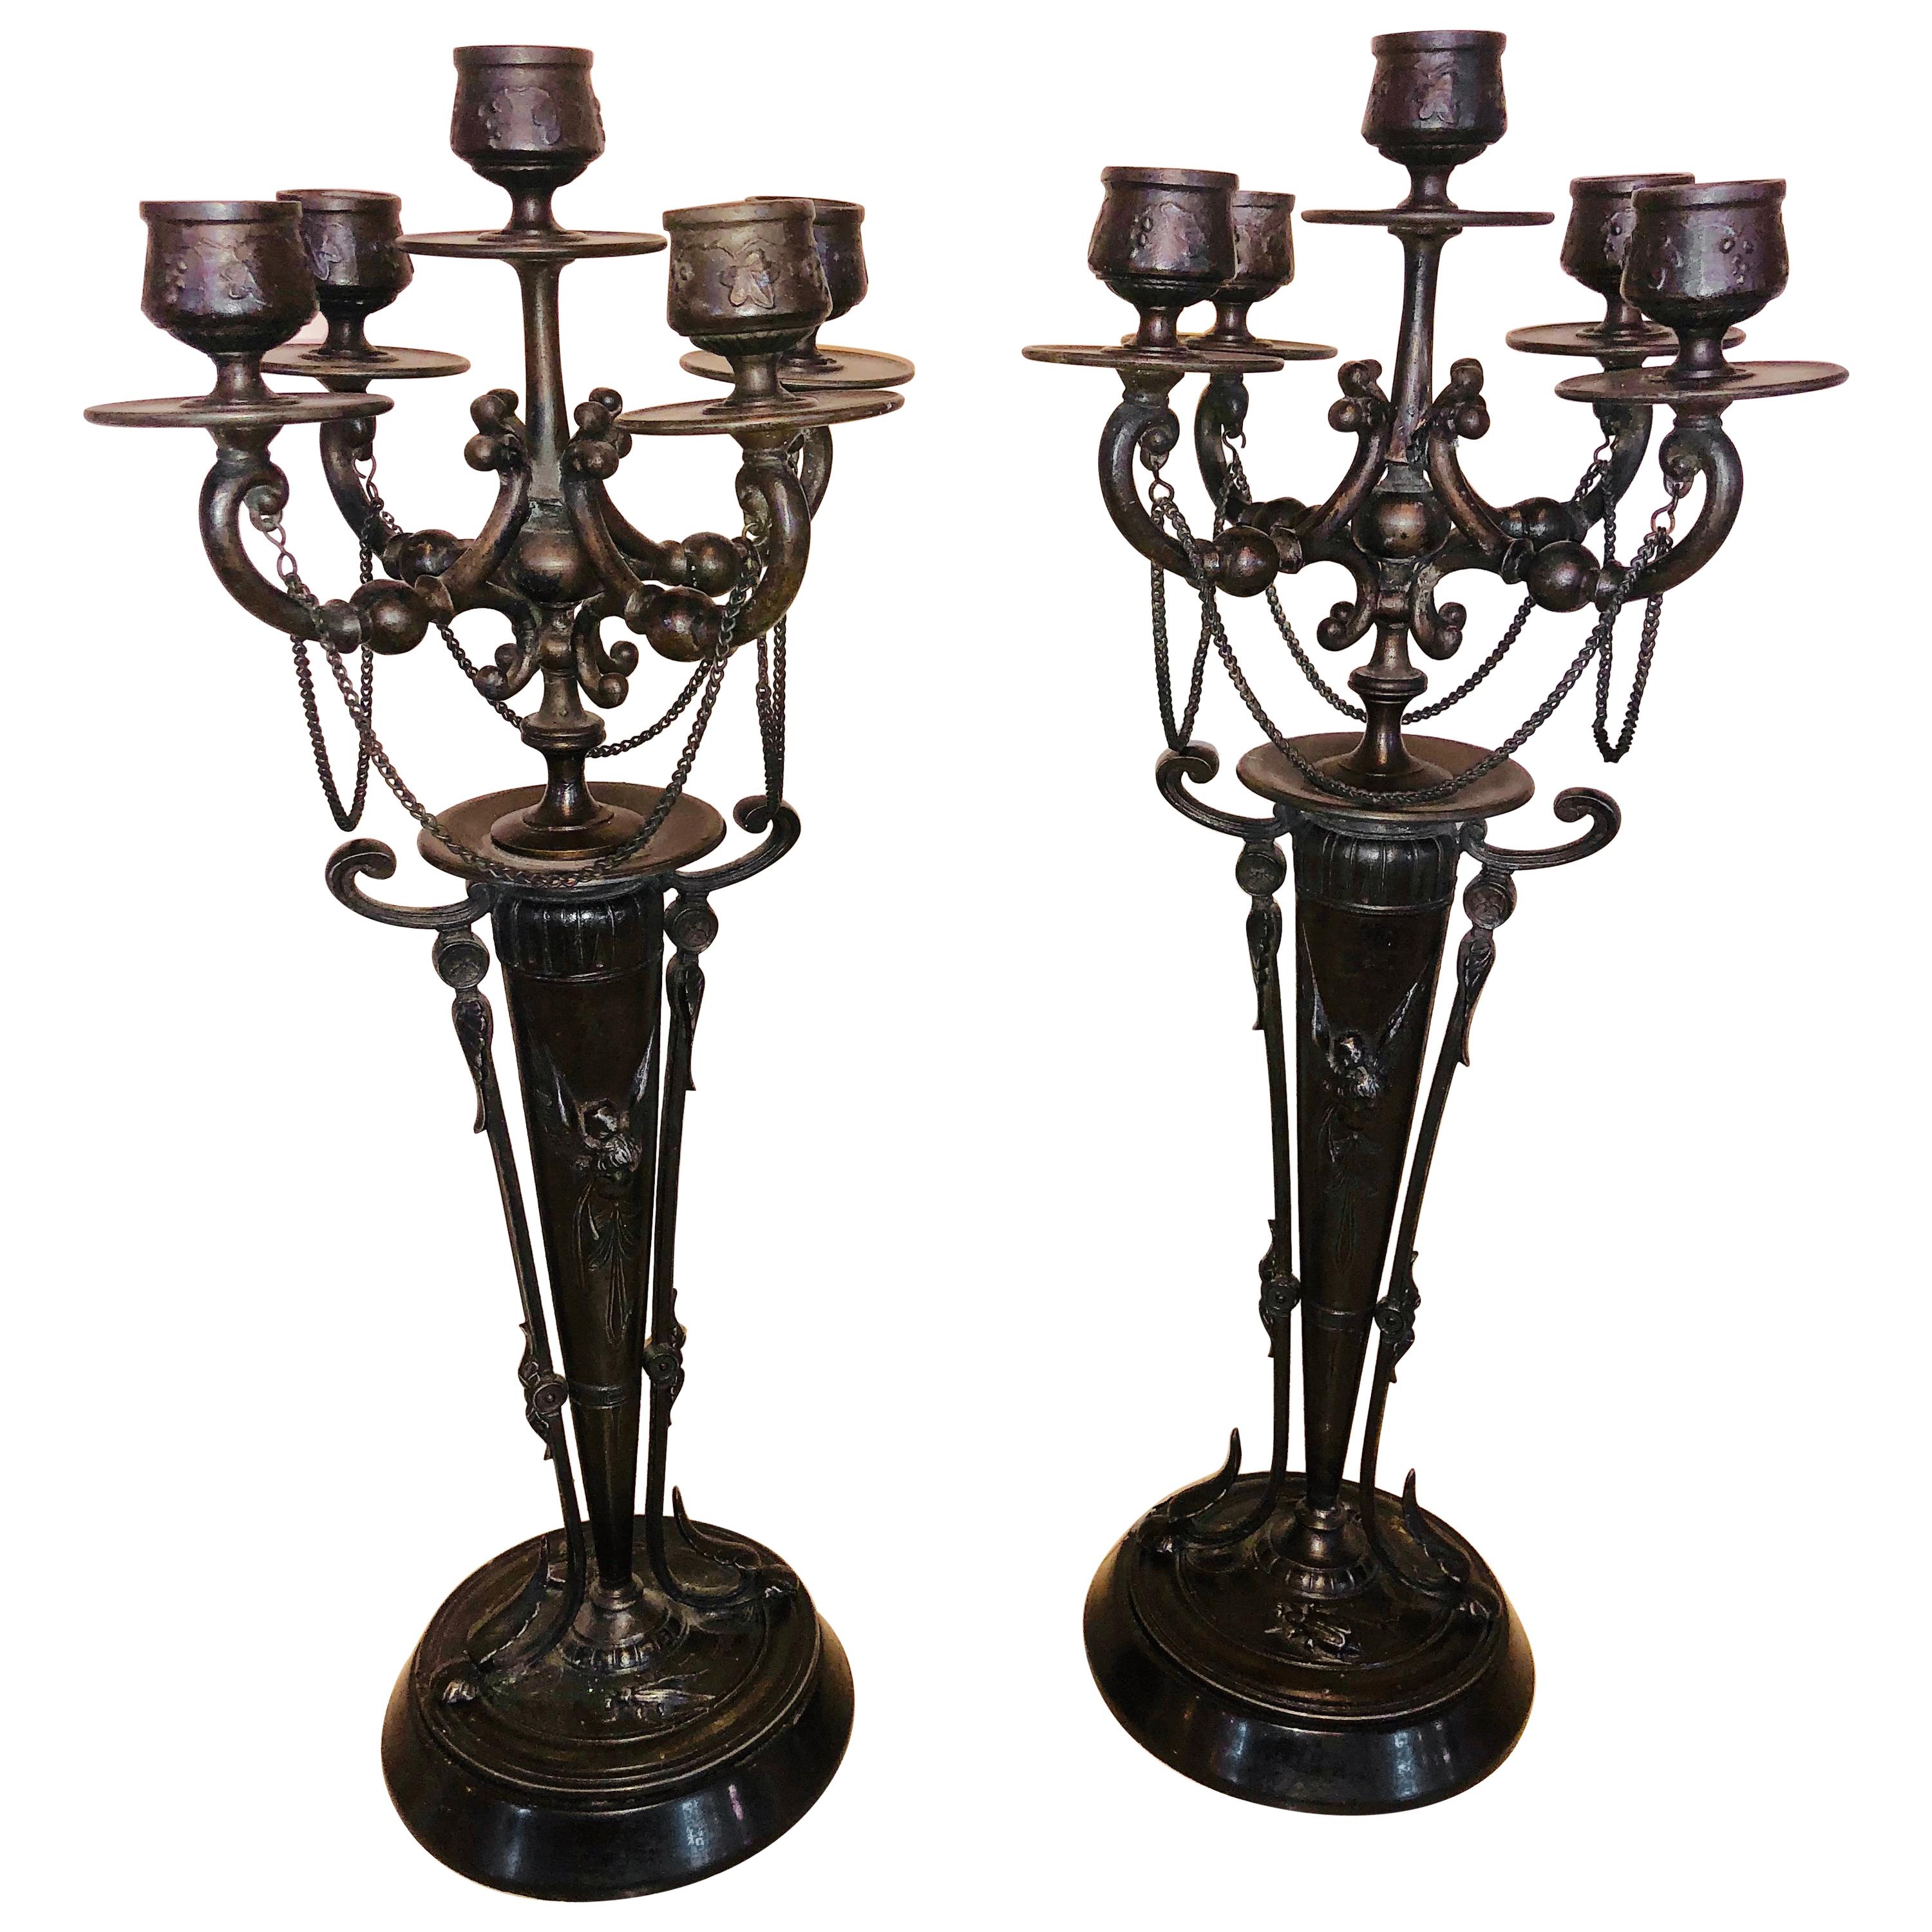 French Design, Empire, Candelabras, Patinated Bronze, France, 19th C.